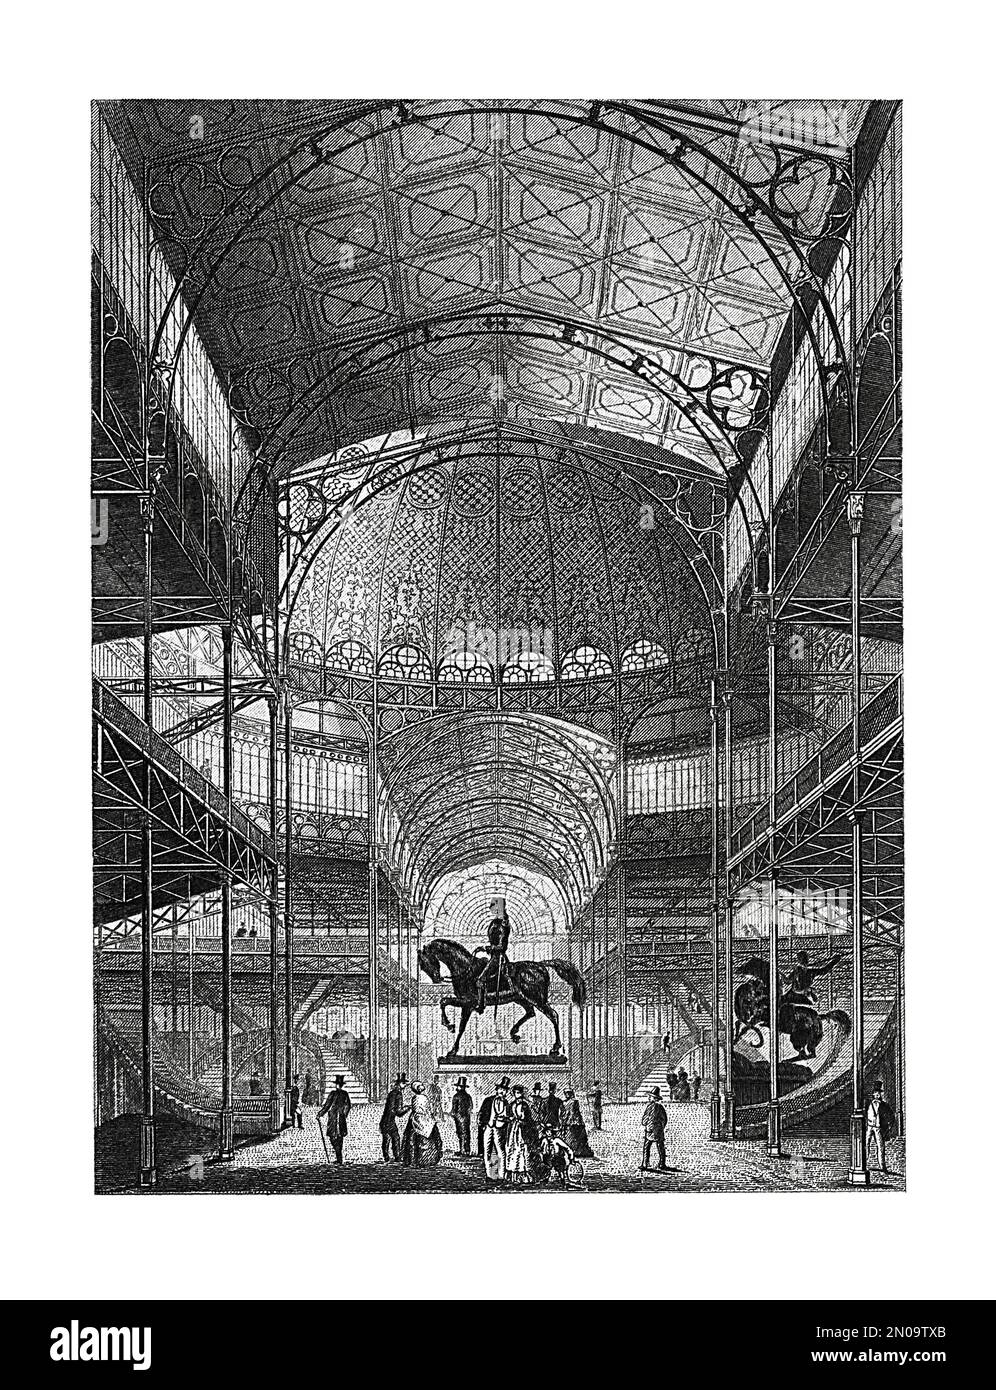 Antique 19th-century engraving depicting interior of New York Crystal Palace. The palace was designed by Georg Carstensen and Charles Gildemeister. Stock Photo